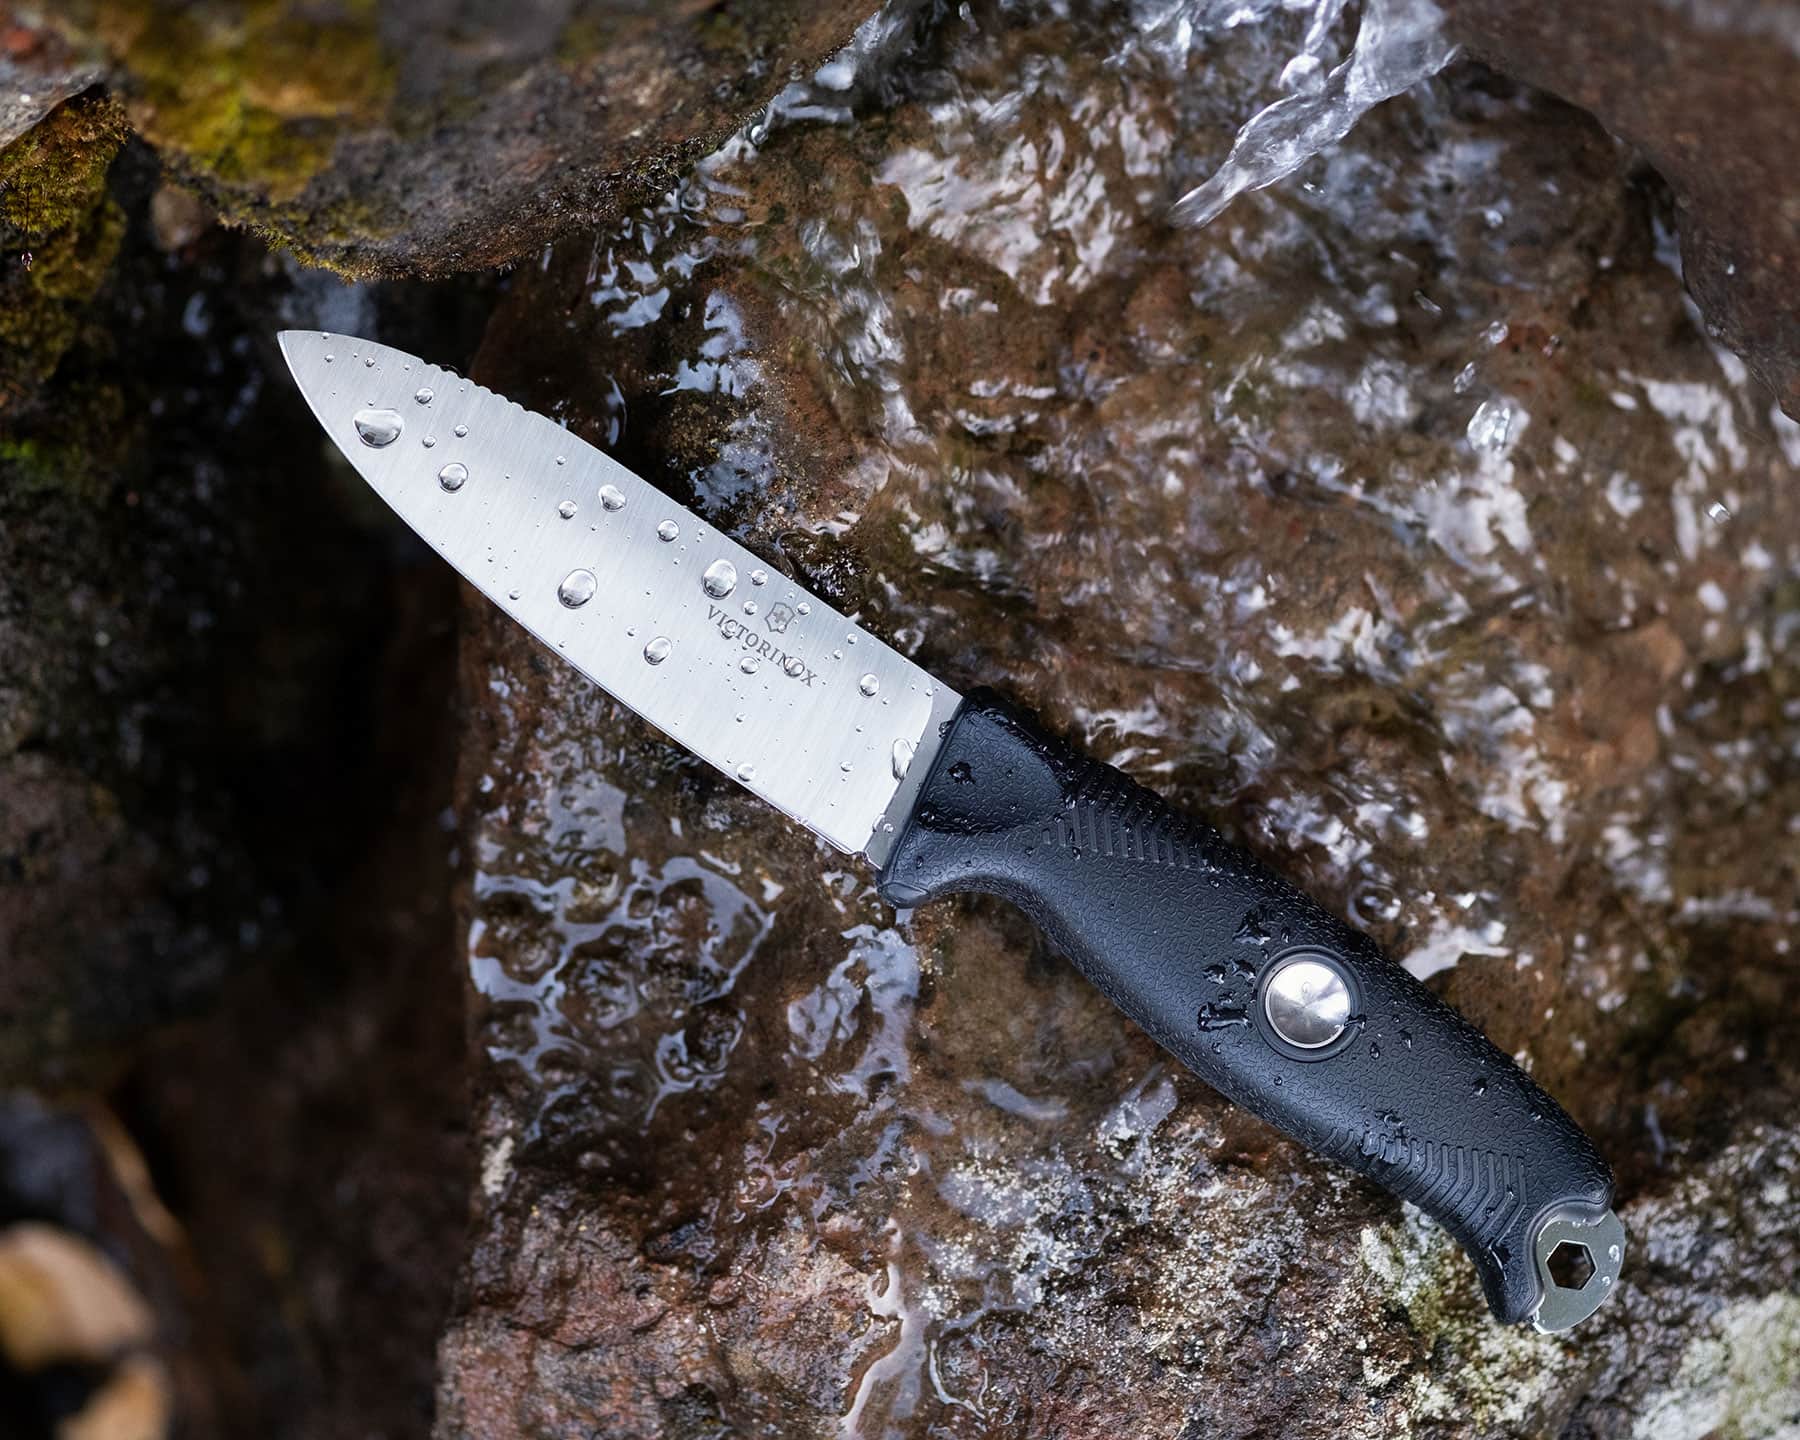 The Victorinox Venture won the award for the best budget knife from Switzerland. 